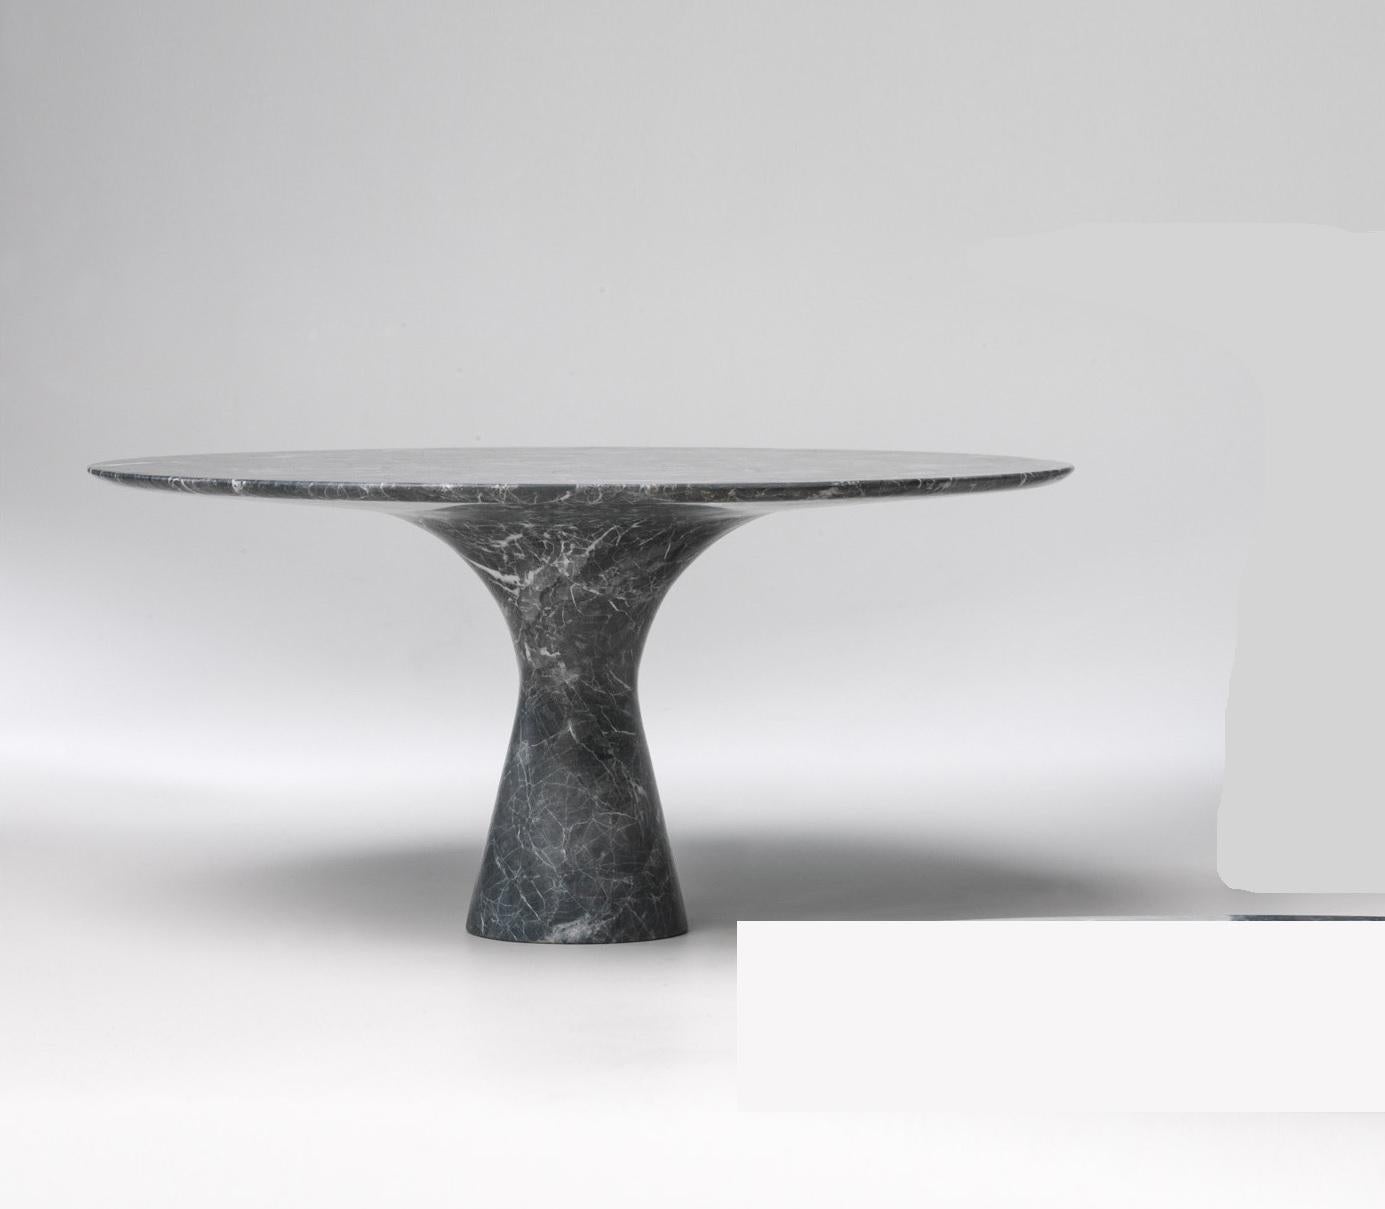 Refined Contemporary marble 02 grey saint laurent marble cake stand
Signed by Leo Aerts.
Dimensions: diameter 32 x height 15 cm 
Material: grafite marble
Technique: polished, carved. 
Available in Marble: Kyknos, Bianco Statuarietto, Grey Saint